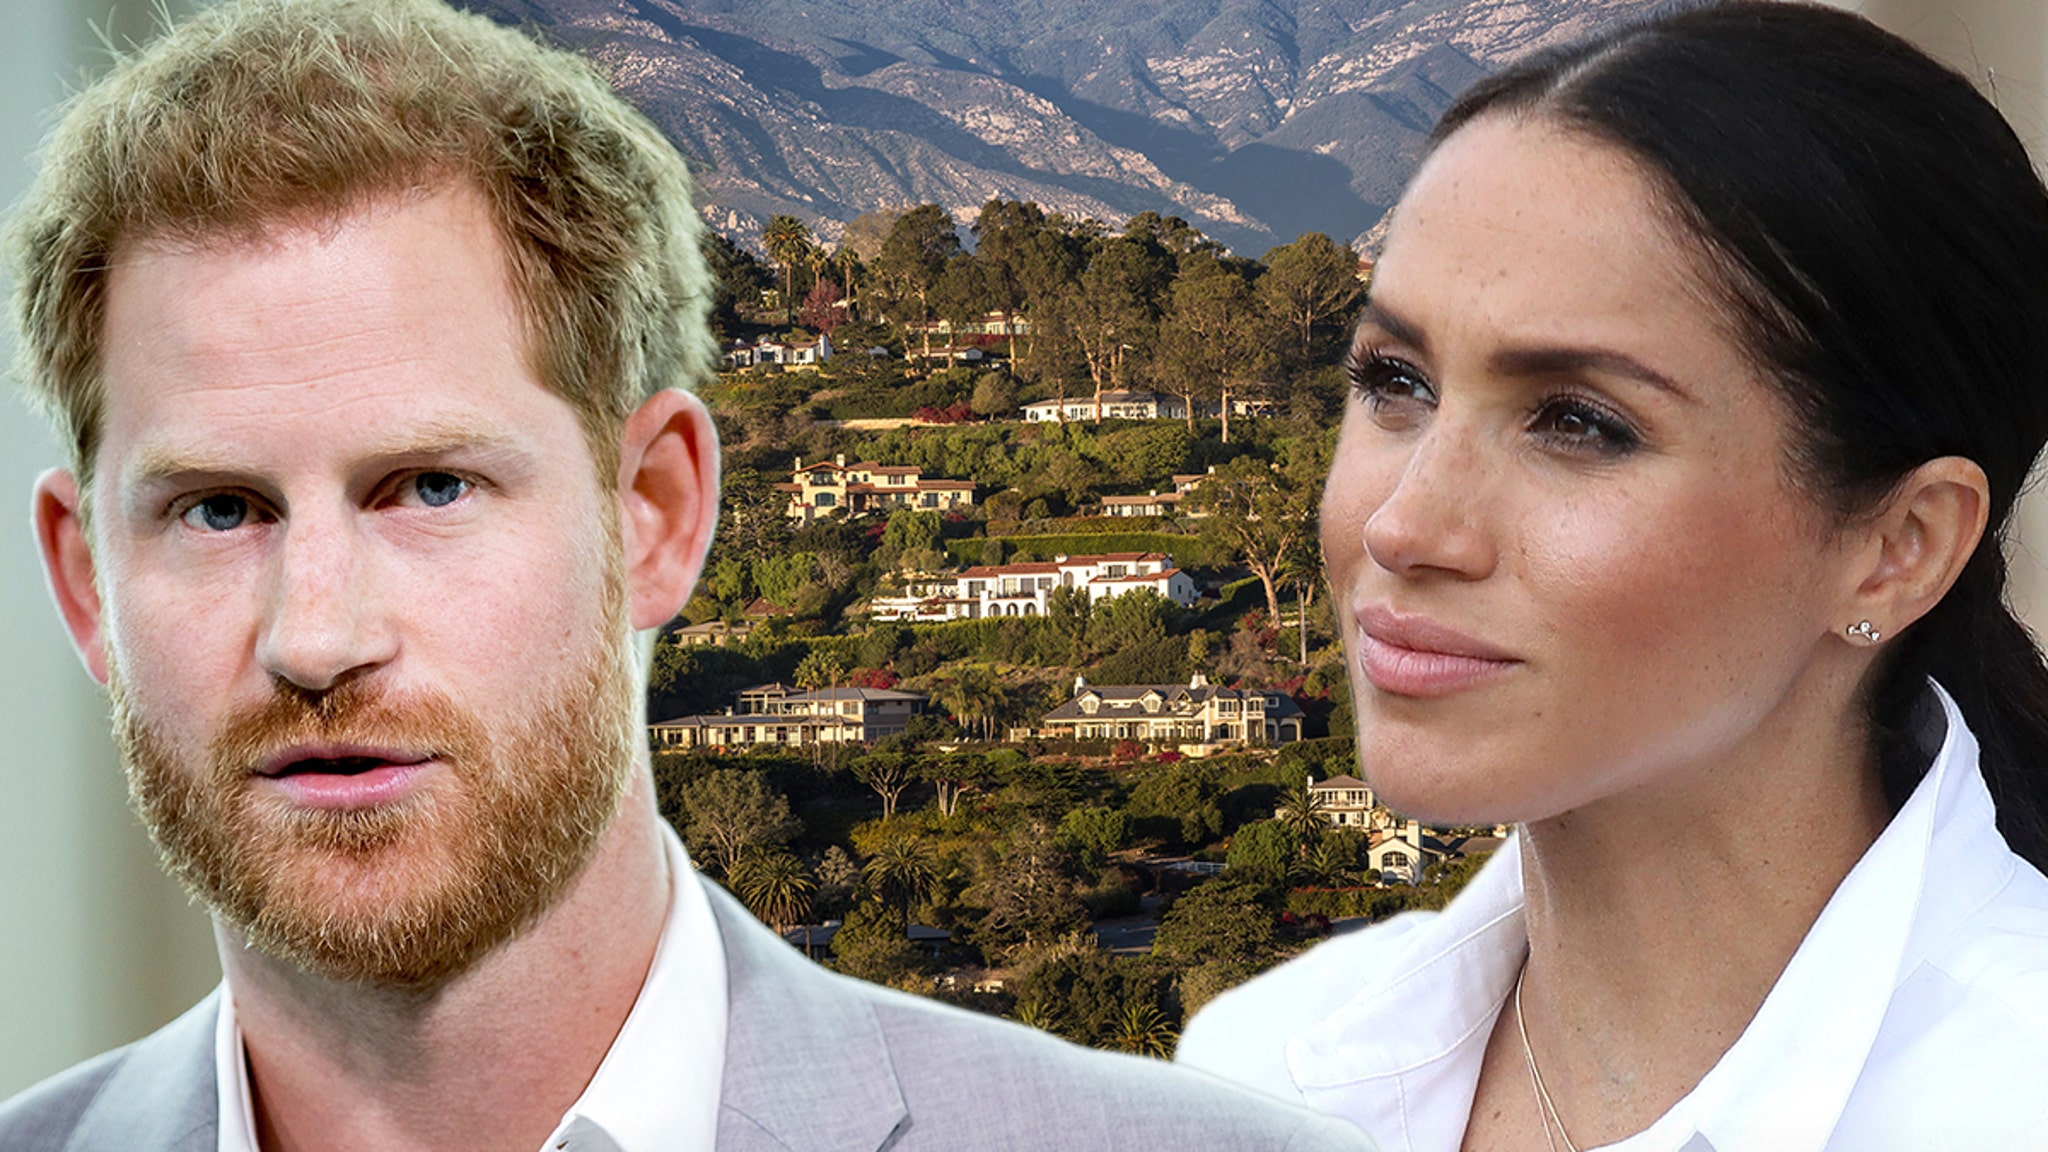 Prince Harry and Meghan Markle’s Potential Move To Hope Ranch Has Neighbors Nervous